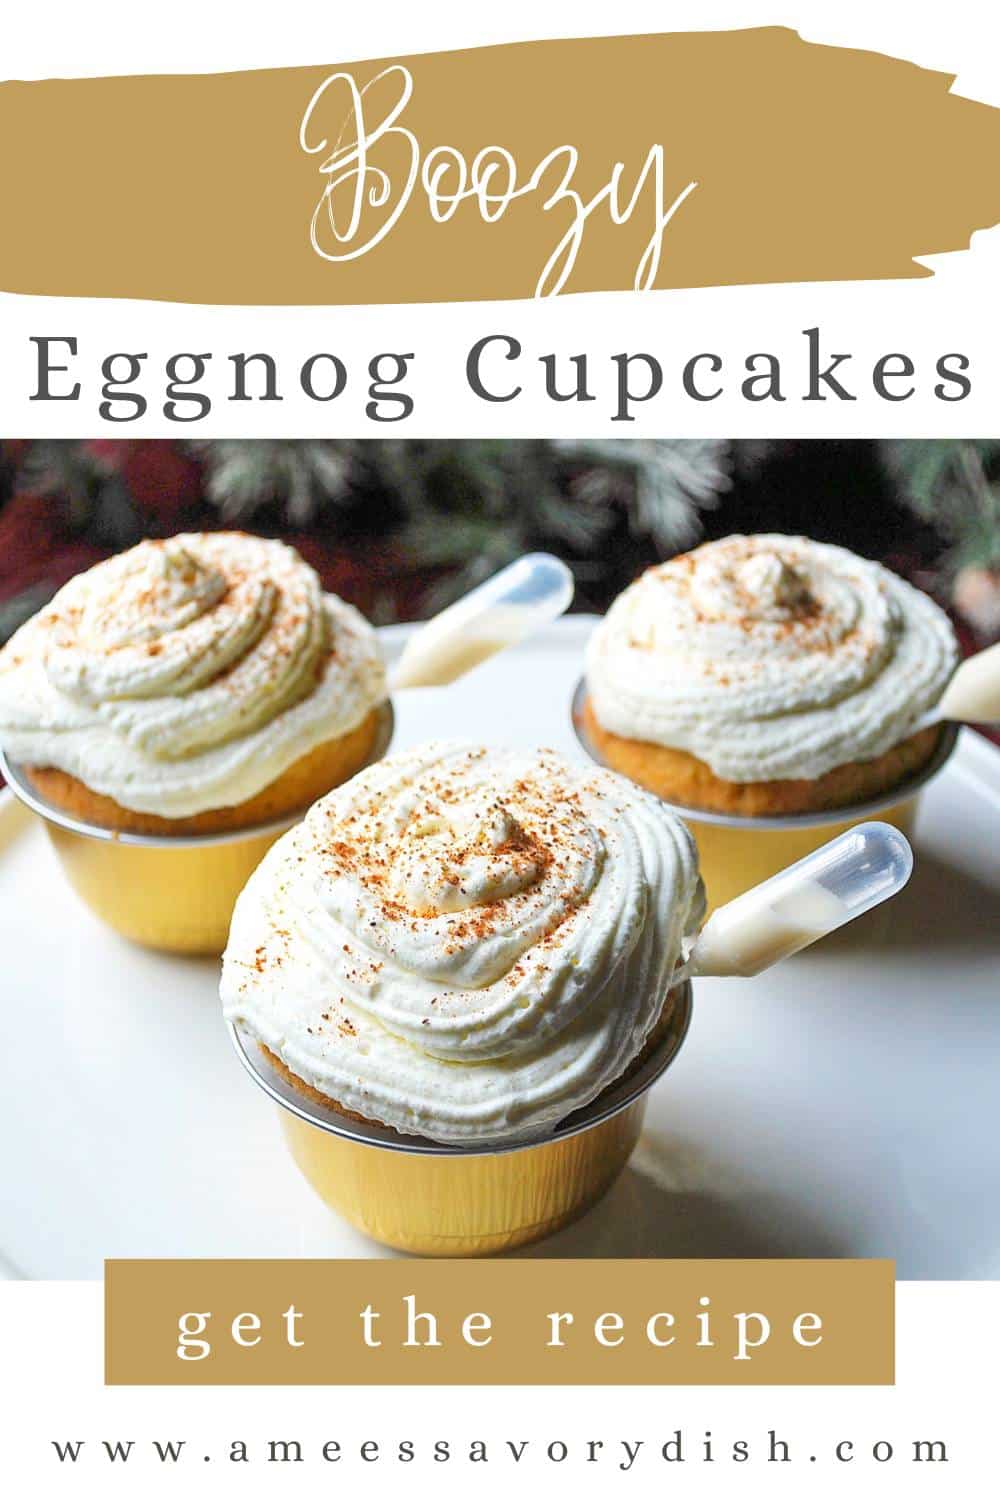 These boozy eggnog cupcakes will be the hit of your holiday spread made with cake mix, egg nog, butter, eggs, & rum topped with rum-infused whipped cream. {Alcohol-free version included} via @Ameessavorydish